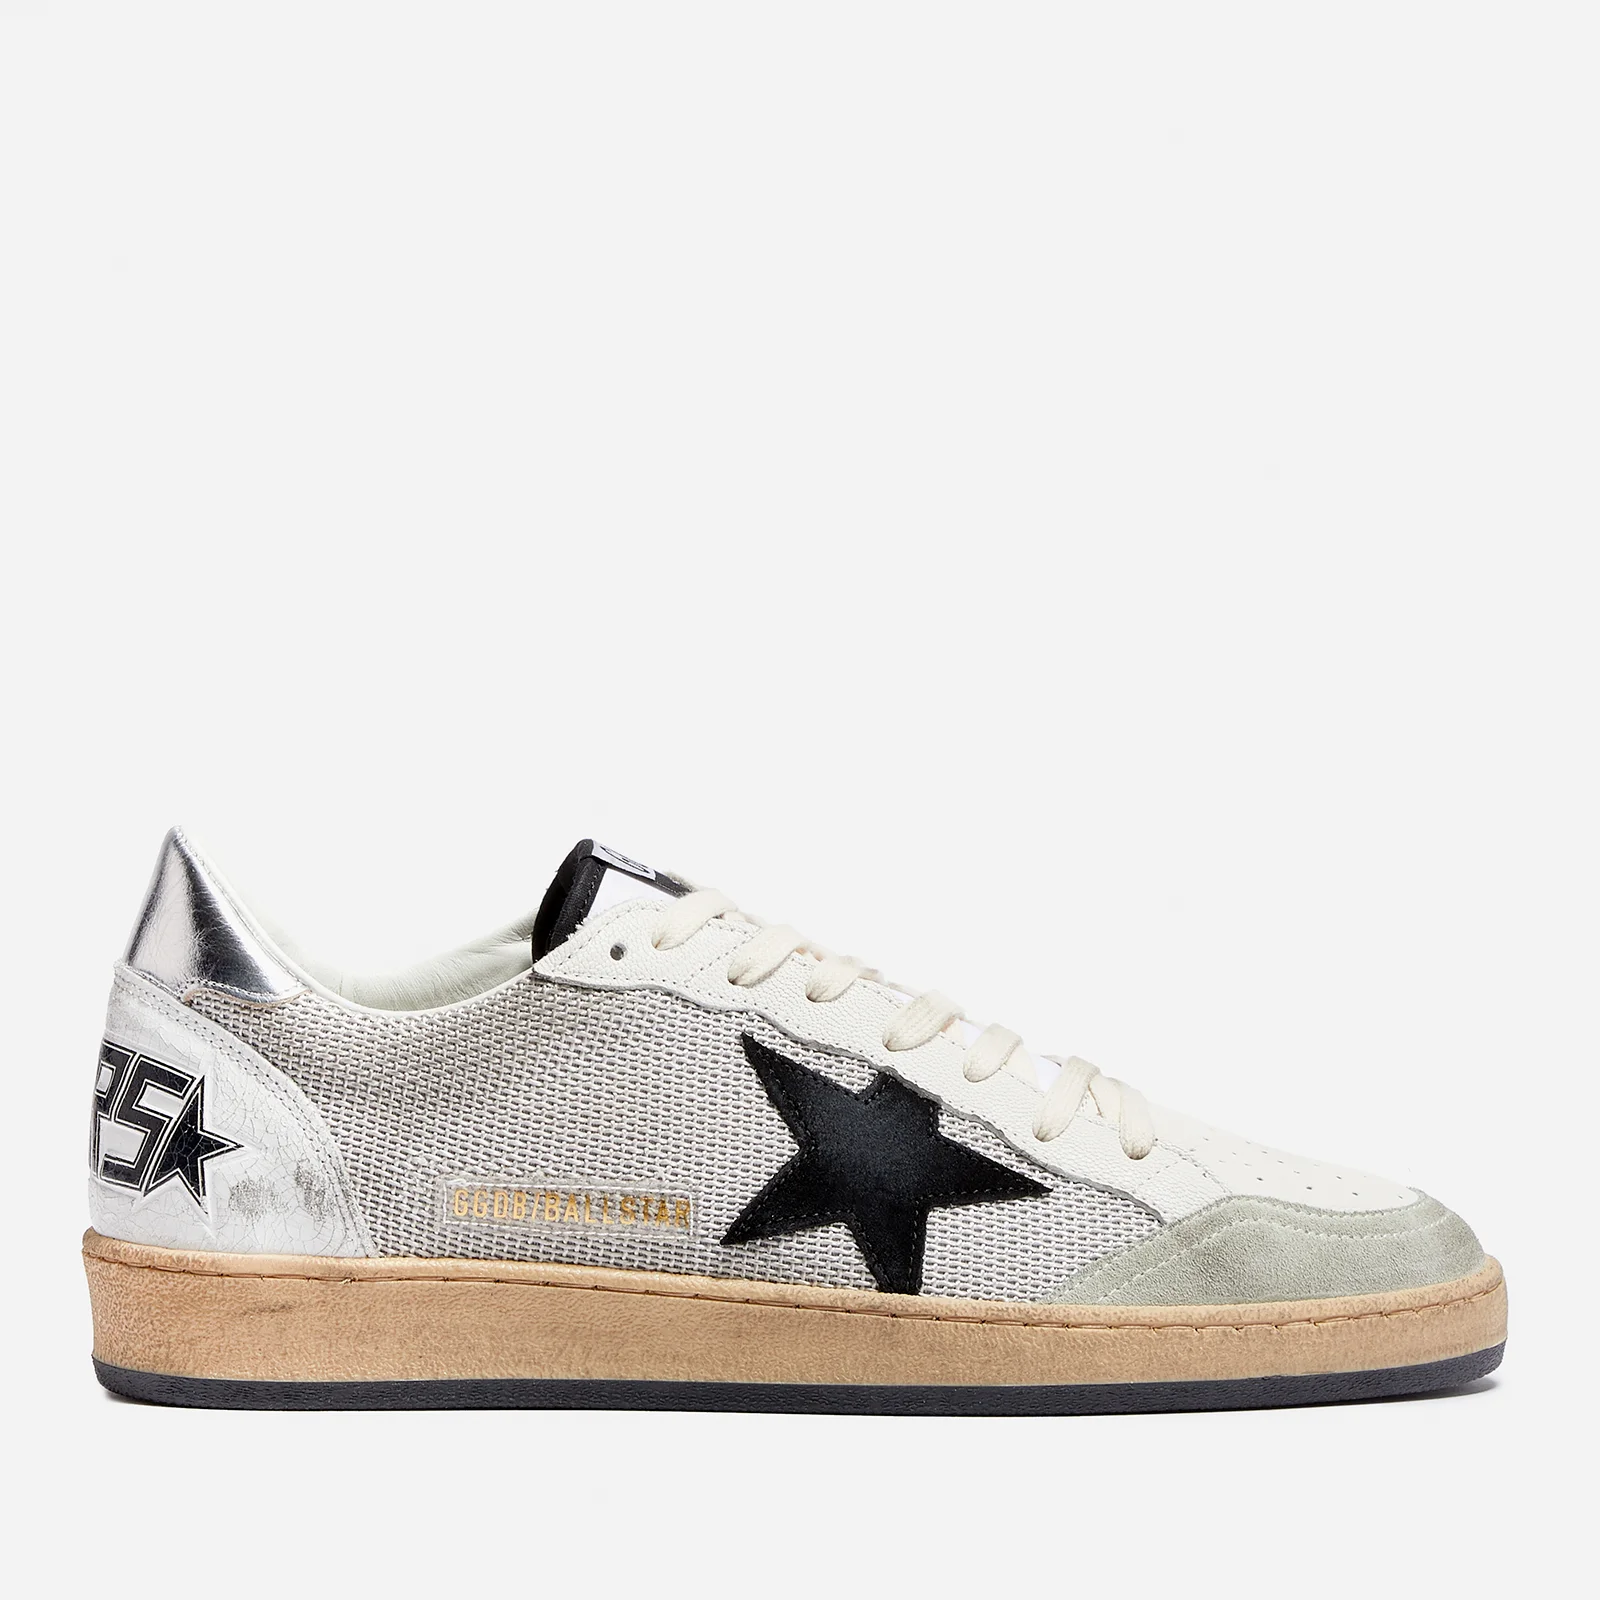 Golden Goose Ball Star Distressed Leather and Canvas Trainers Image 1